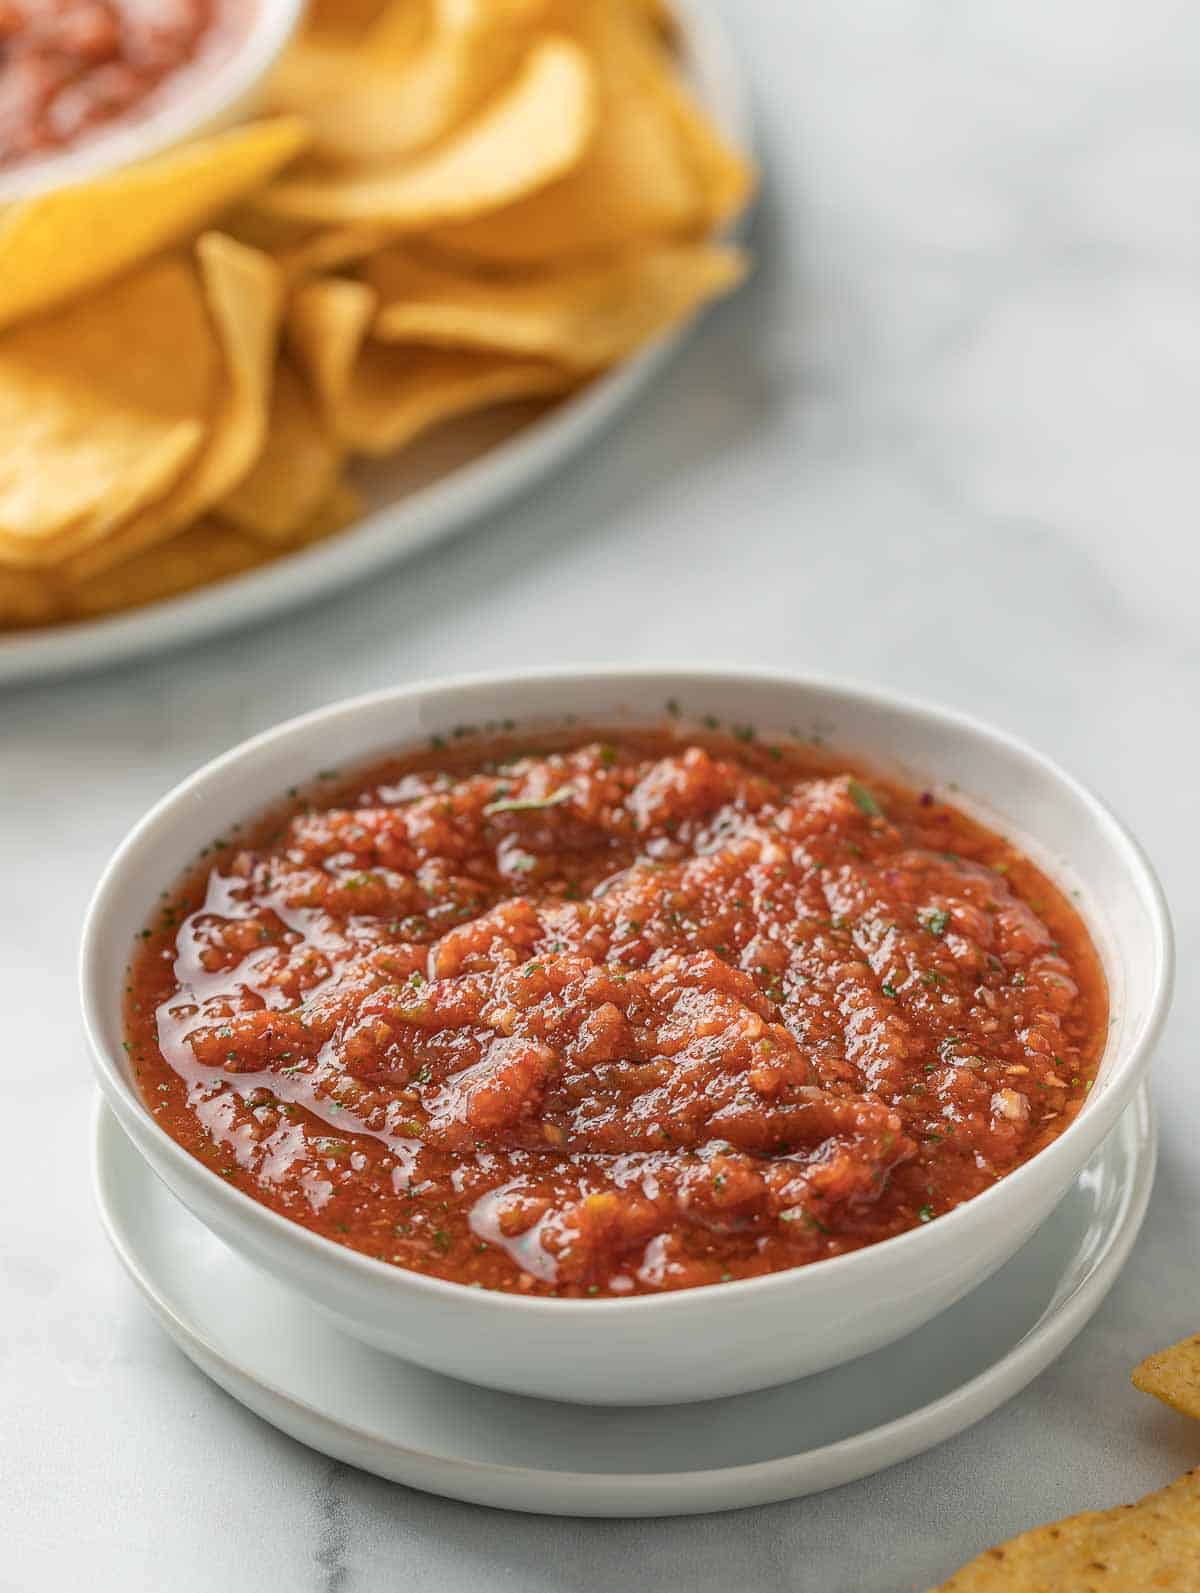 salsa and chips on a plate.